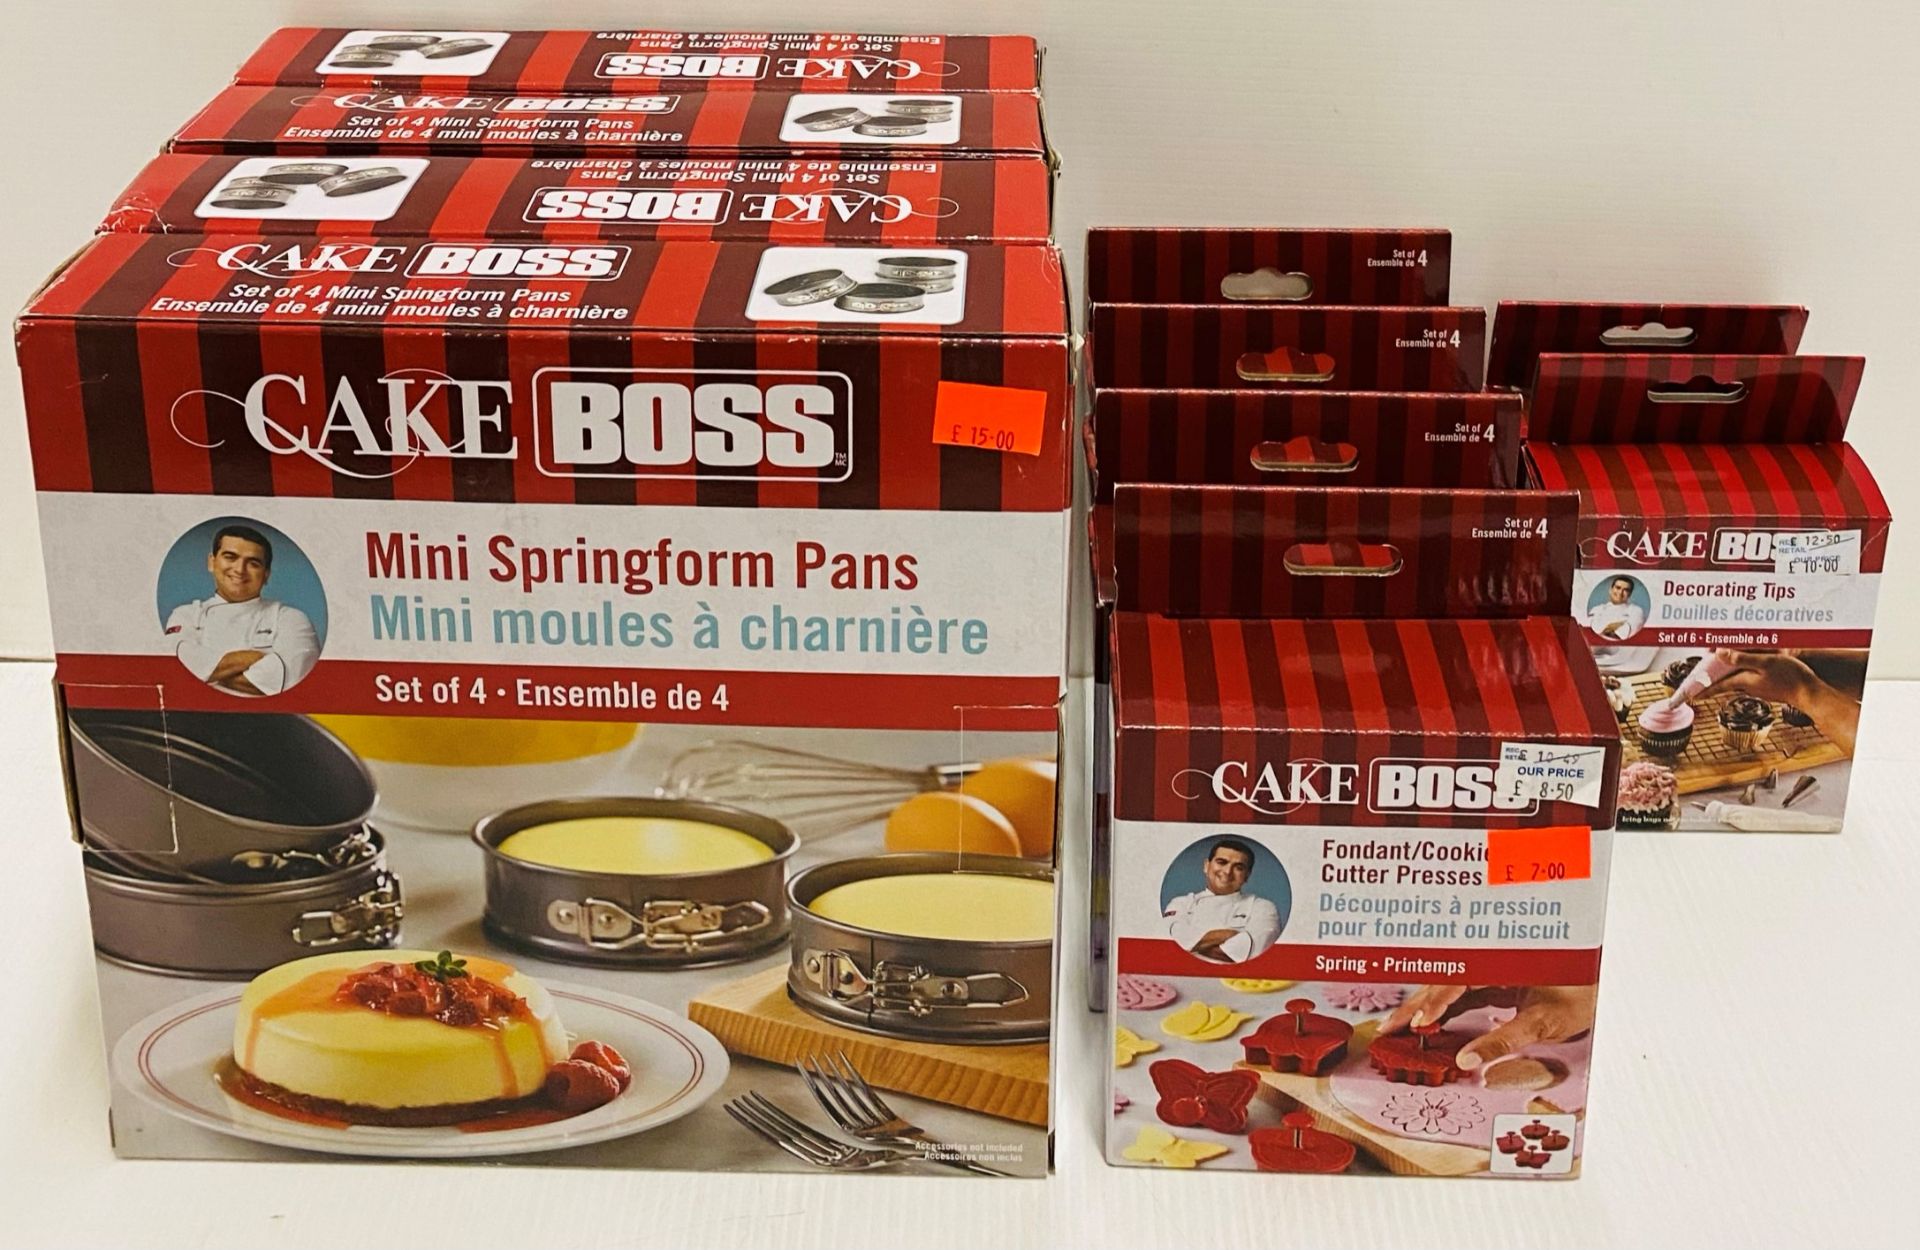 10 x items - assorted Cake Boss items - decorating tips, fondant/cookie cutter,